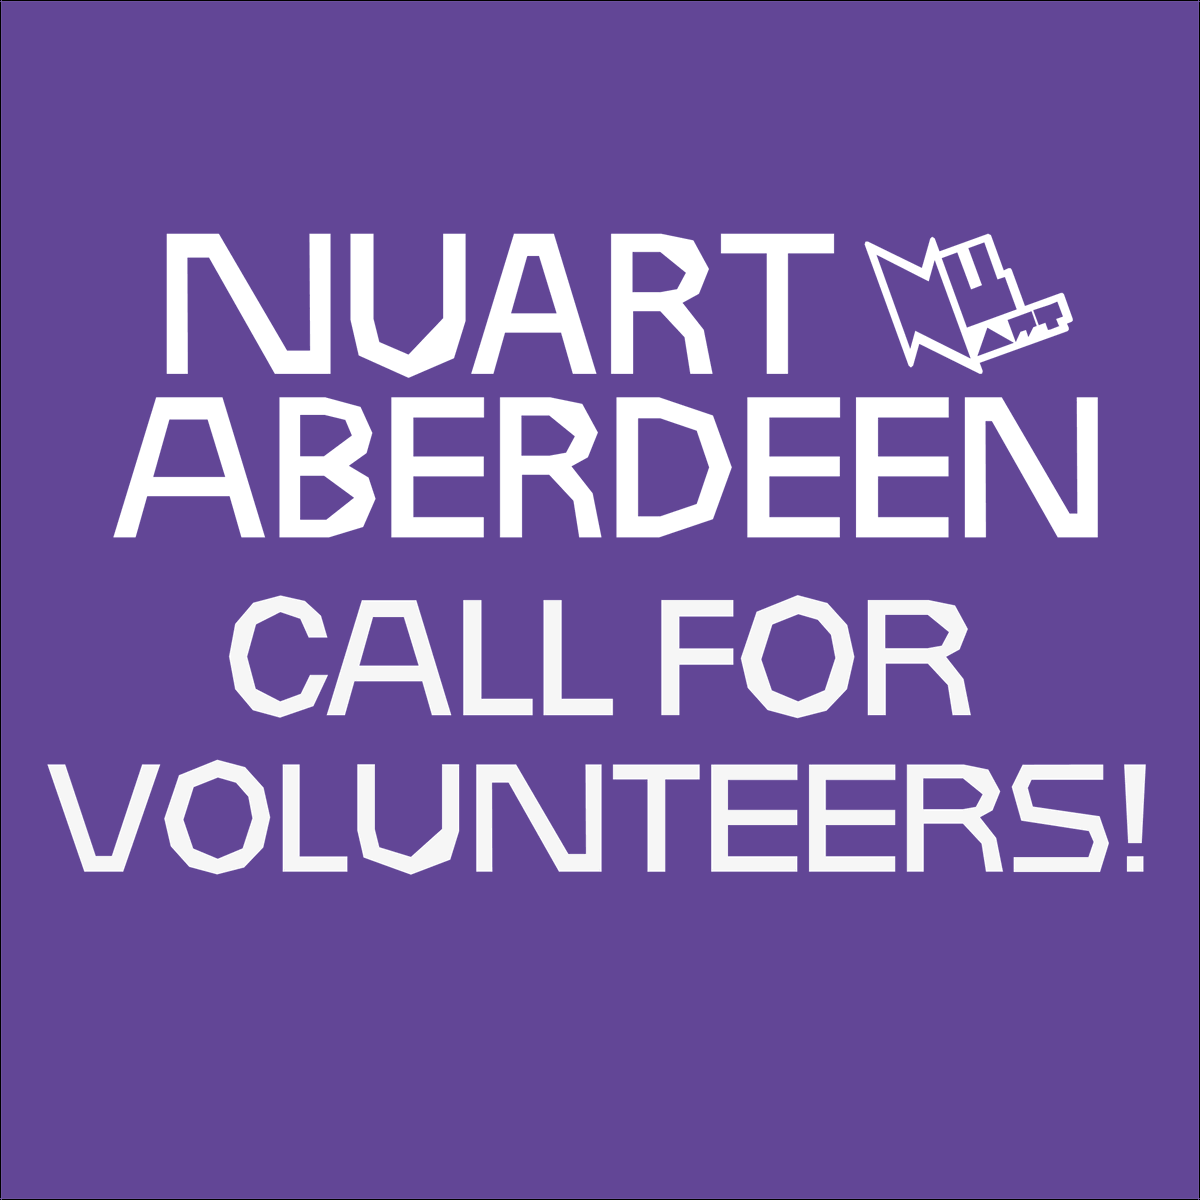 📢@nuartaberdeen SEEKS VOLUNTEERS to assist 1-12 June.  Roles include Artist Assistants, Drivers,  Events Assistants, Production Crew and Runners. Interested? More info & sign up via the form here > forms.gle/WMZ6dxvjVRDsWC…. #nuart2023 #nuartaberdeen #volunteeraberdeen